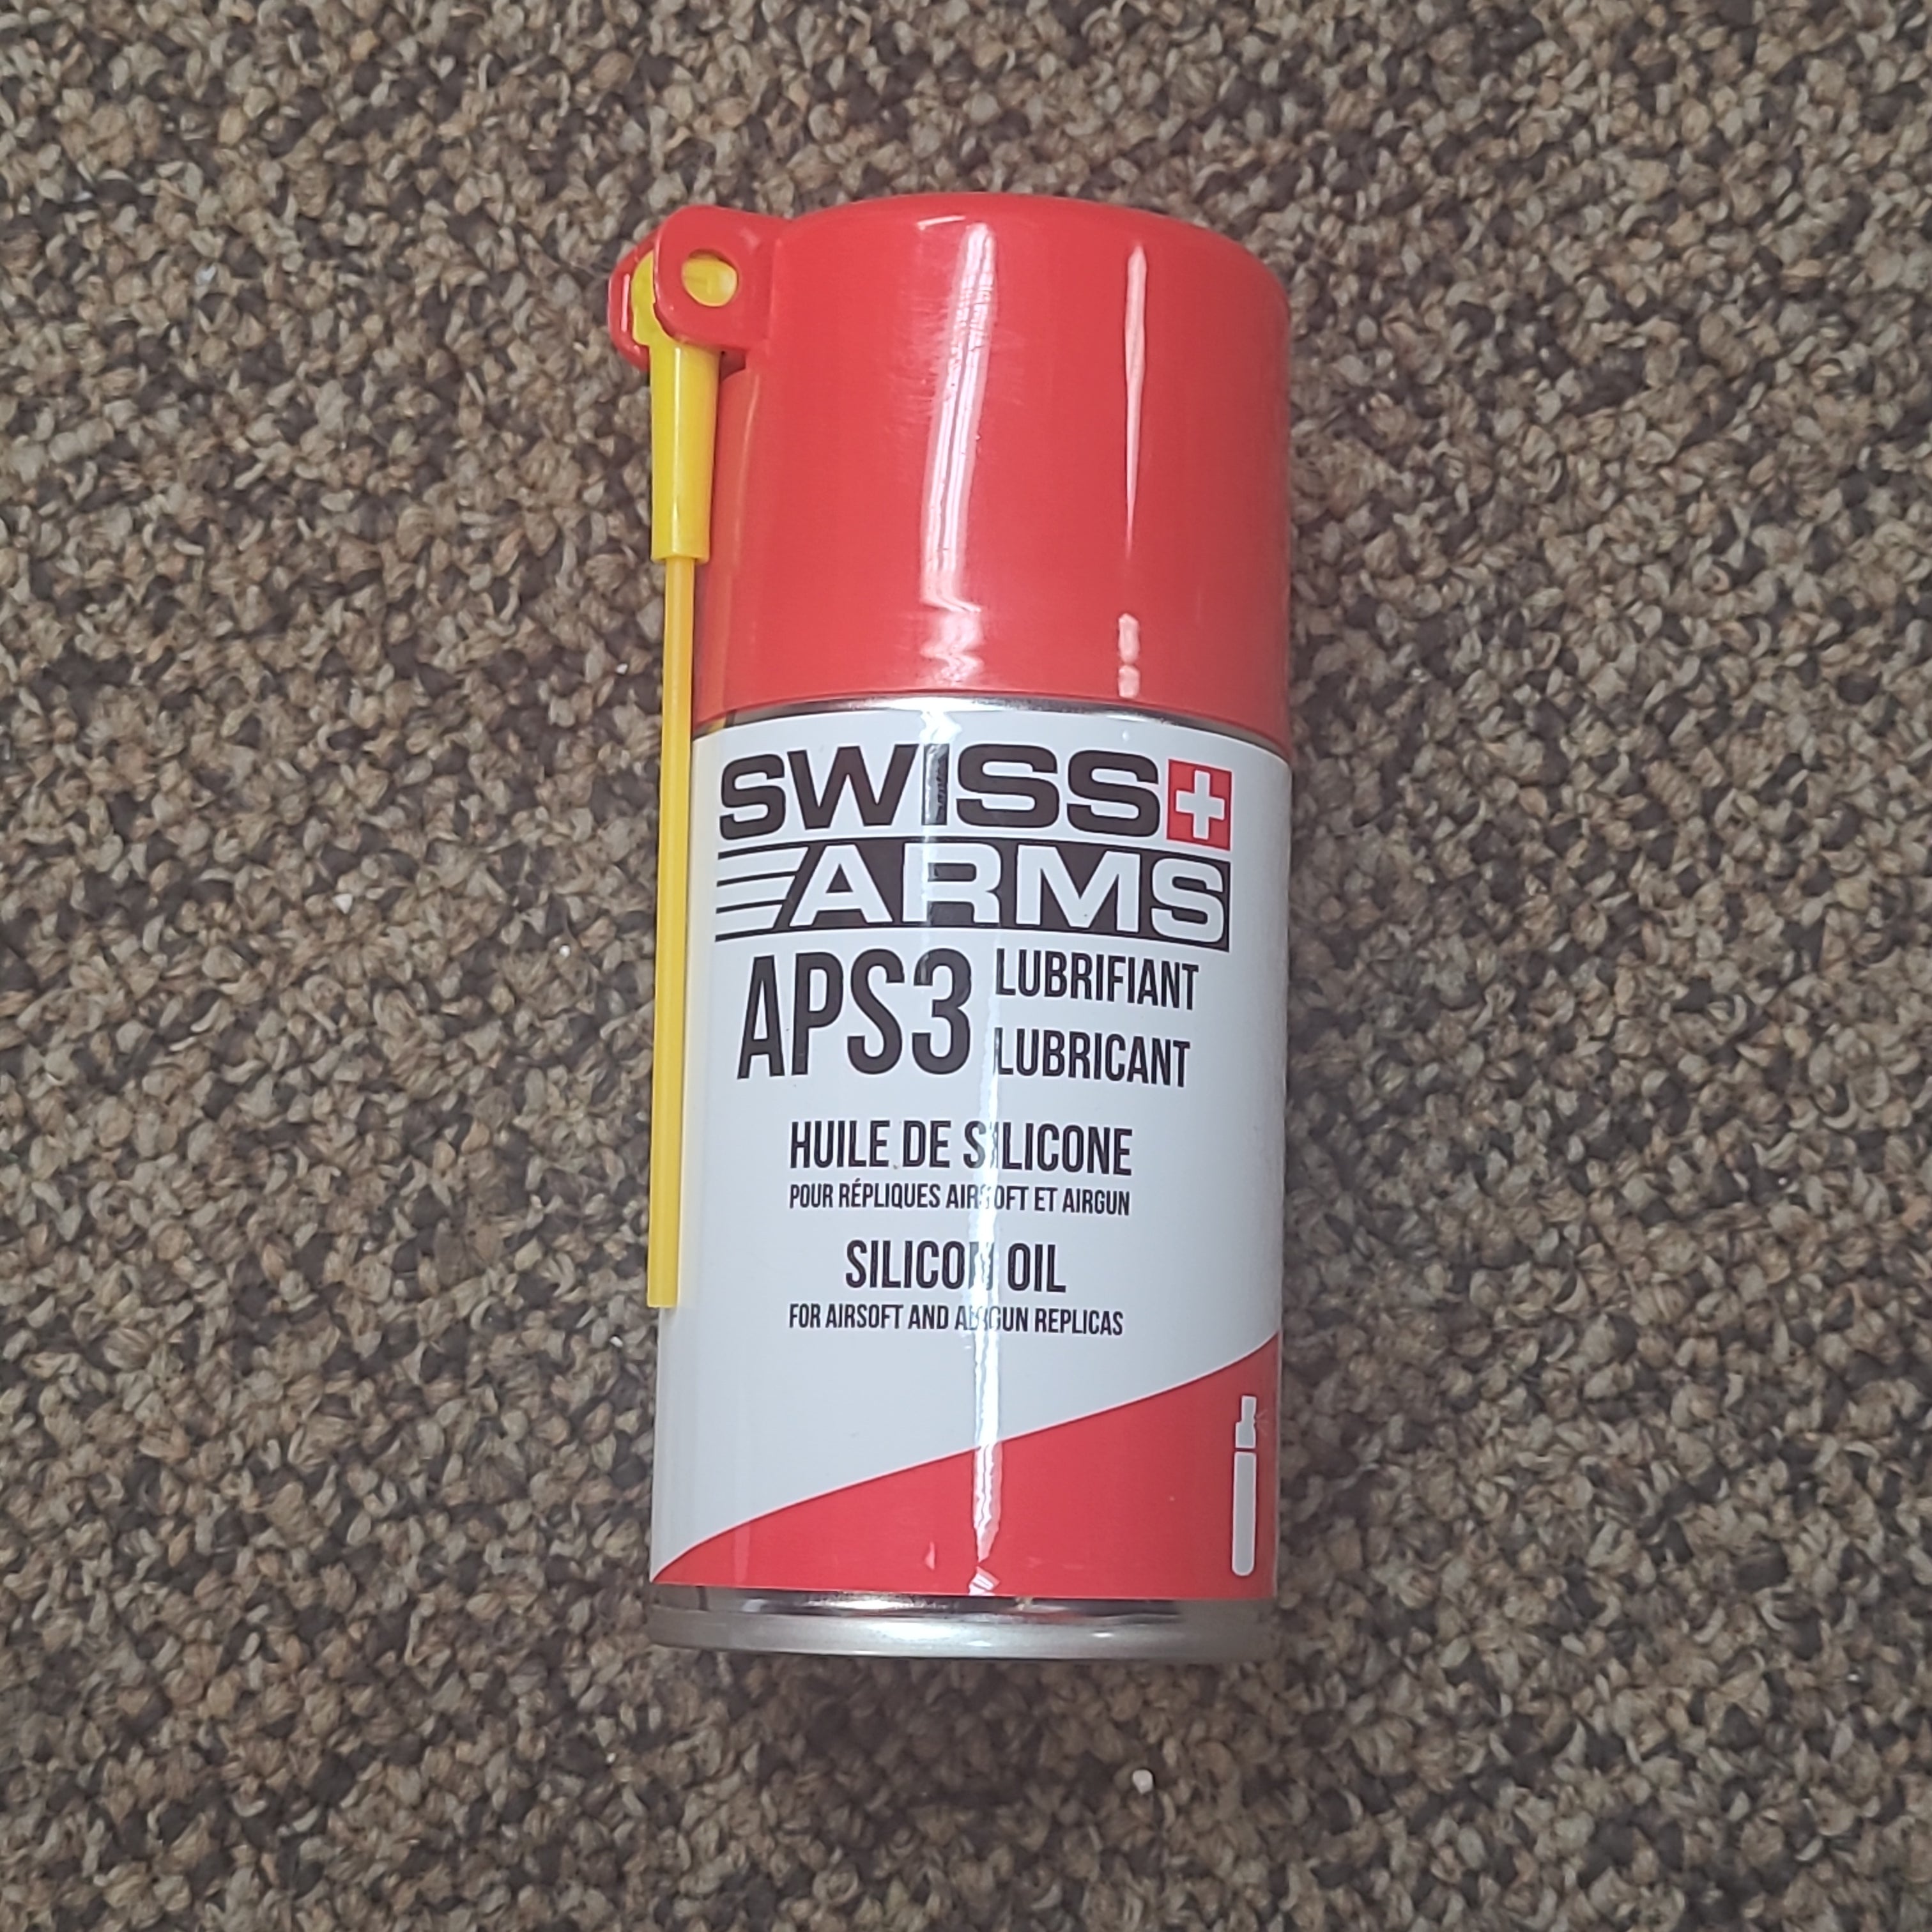 Swiss Arms "eXtrem" 160ml APS3 Silicone Oil Spray w/ Adjustable Nozzle